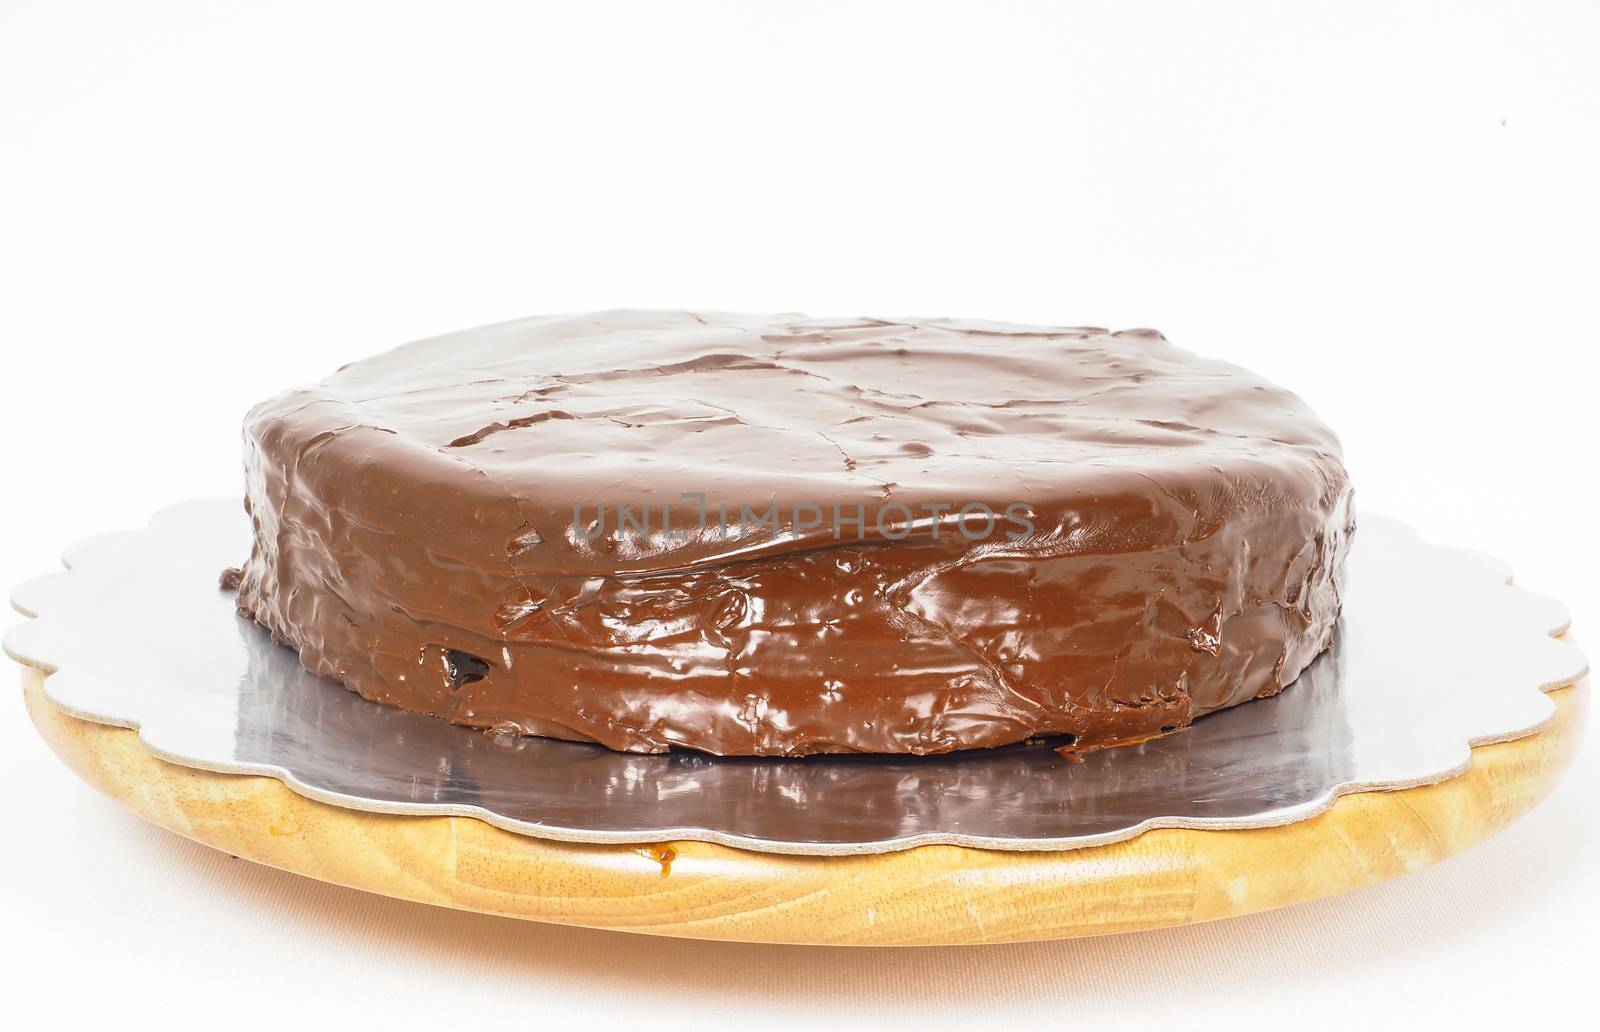 Sacher chocolate cake on a silver plate on wooden board towards white